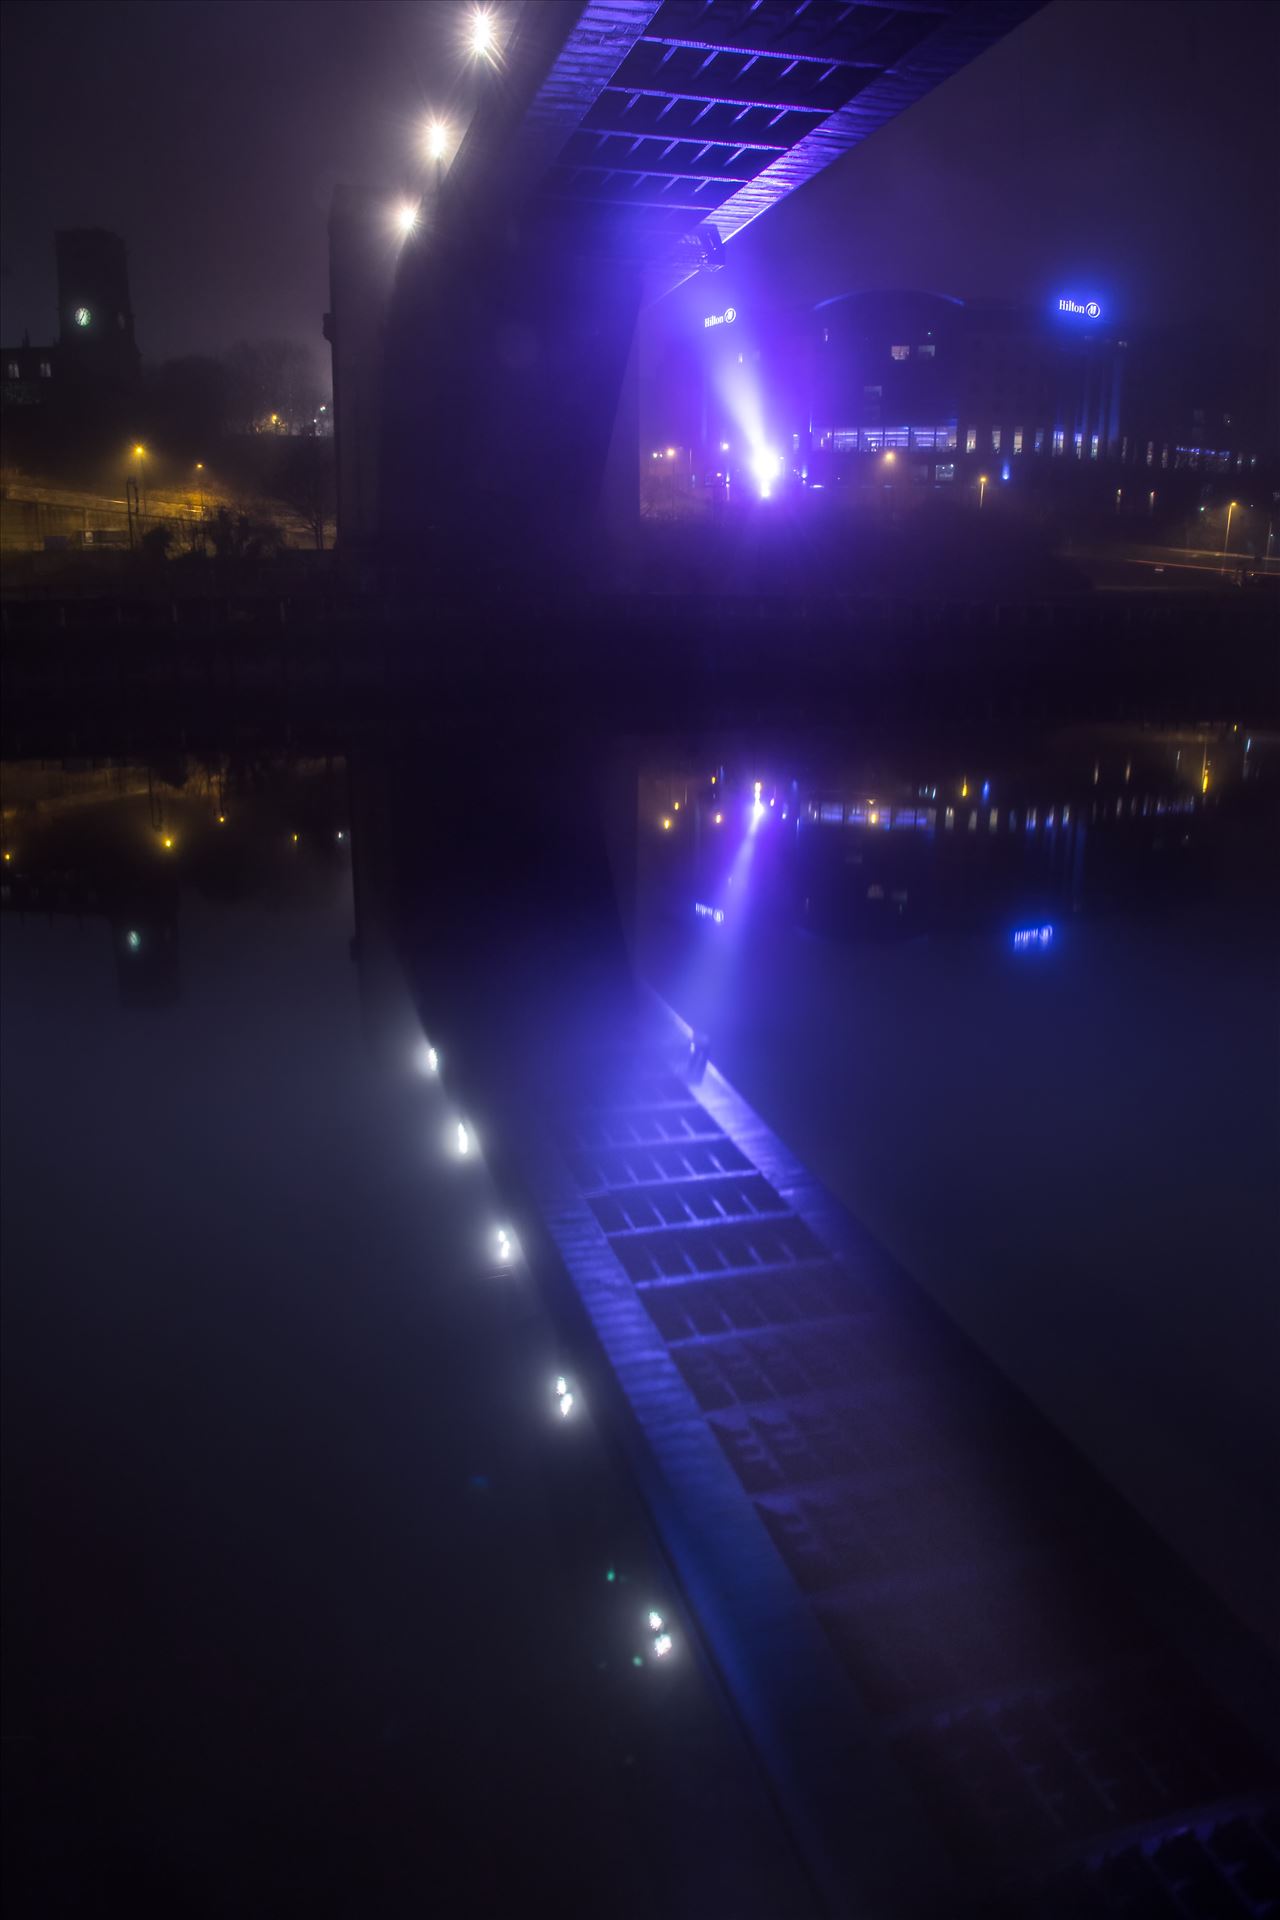 Fog on the Tyne 2 - Shot on the quayside at Newcastle early one foggy morning by philreay